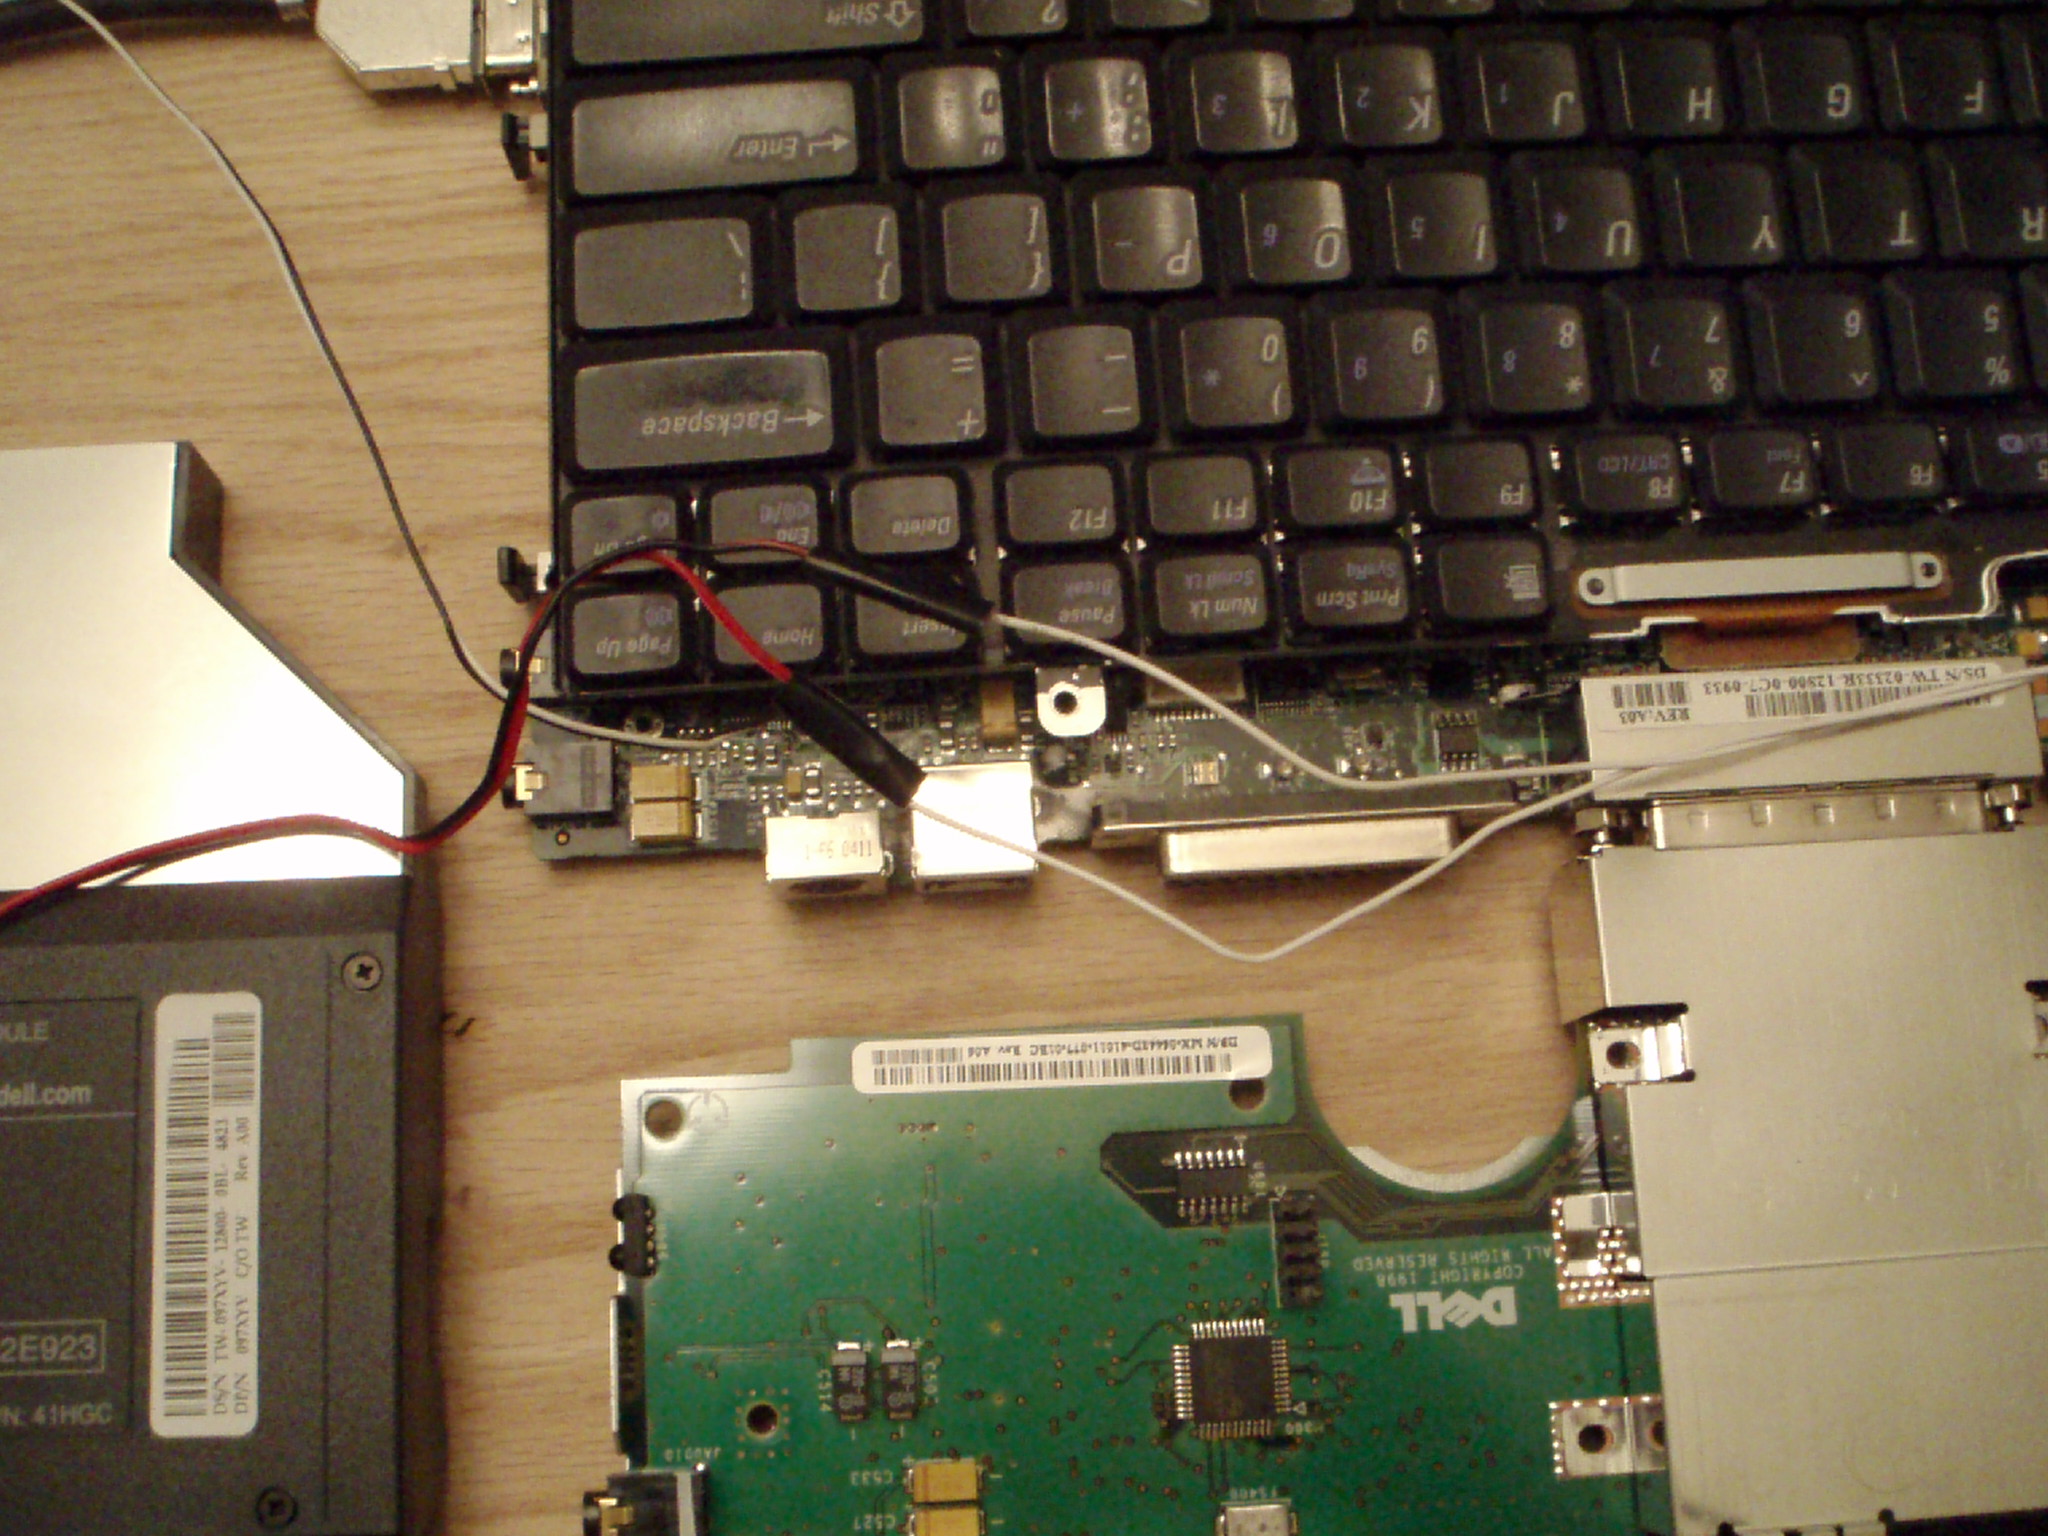 a laptop keyboard connected to the motherboard of a computer